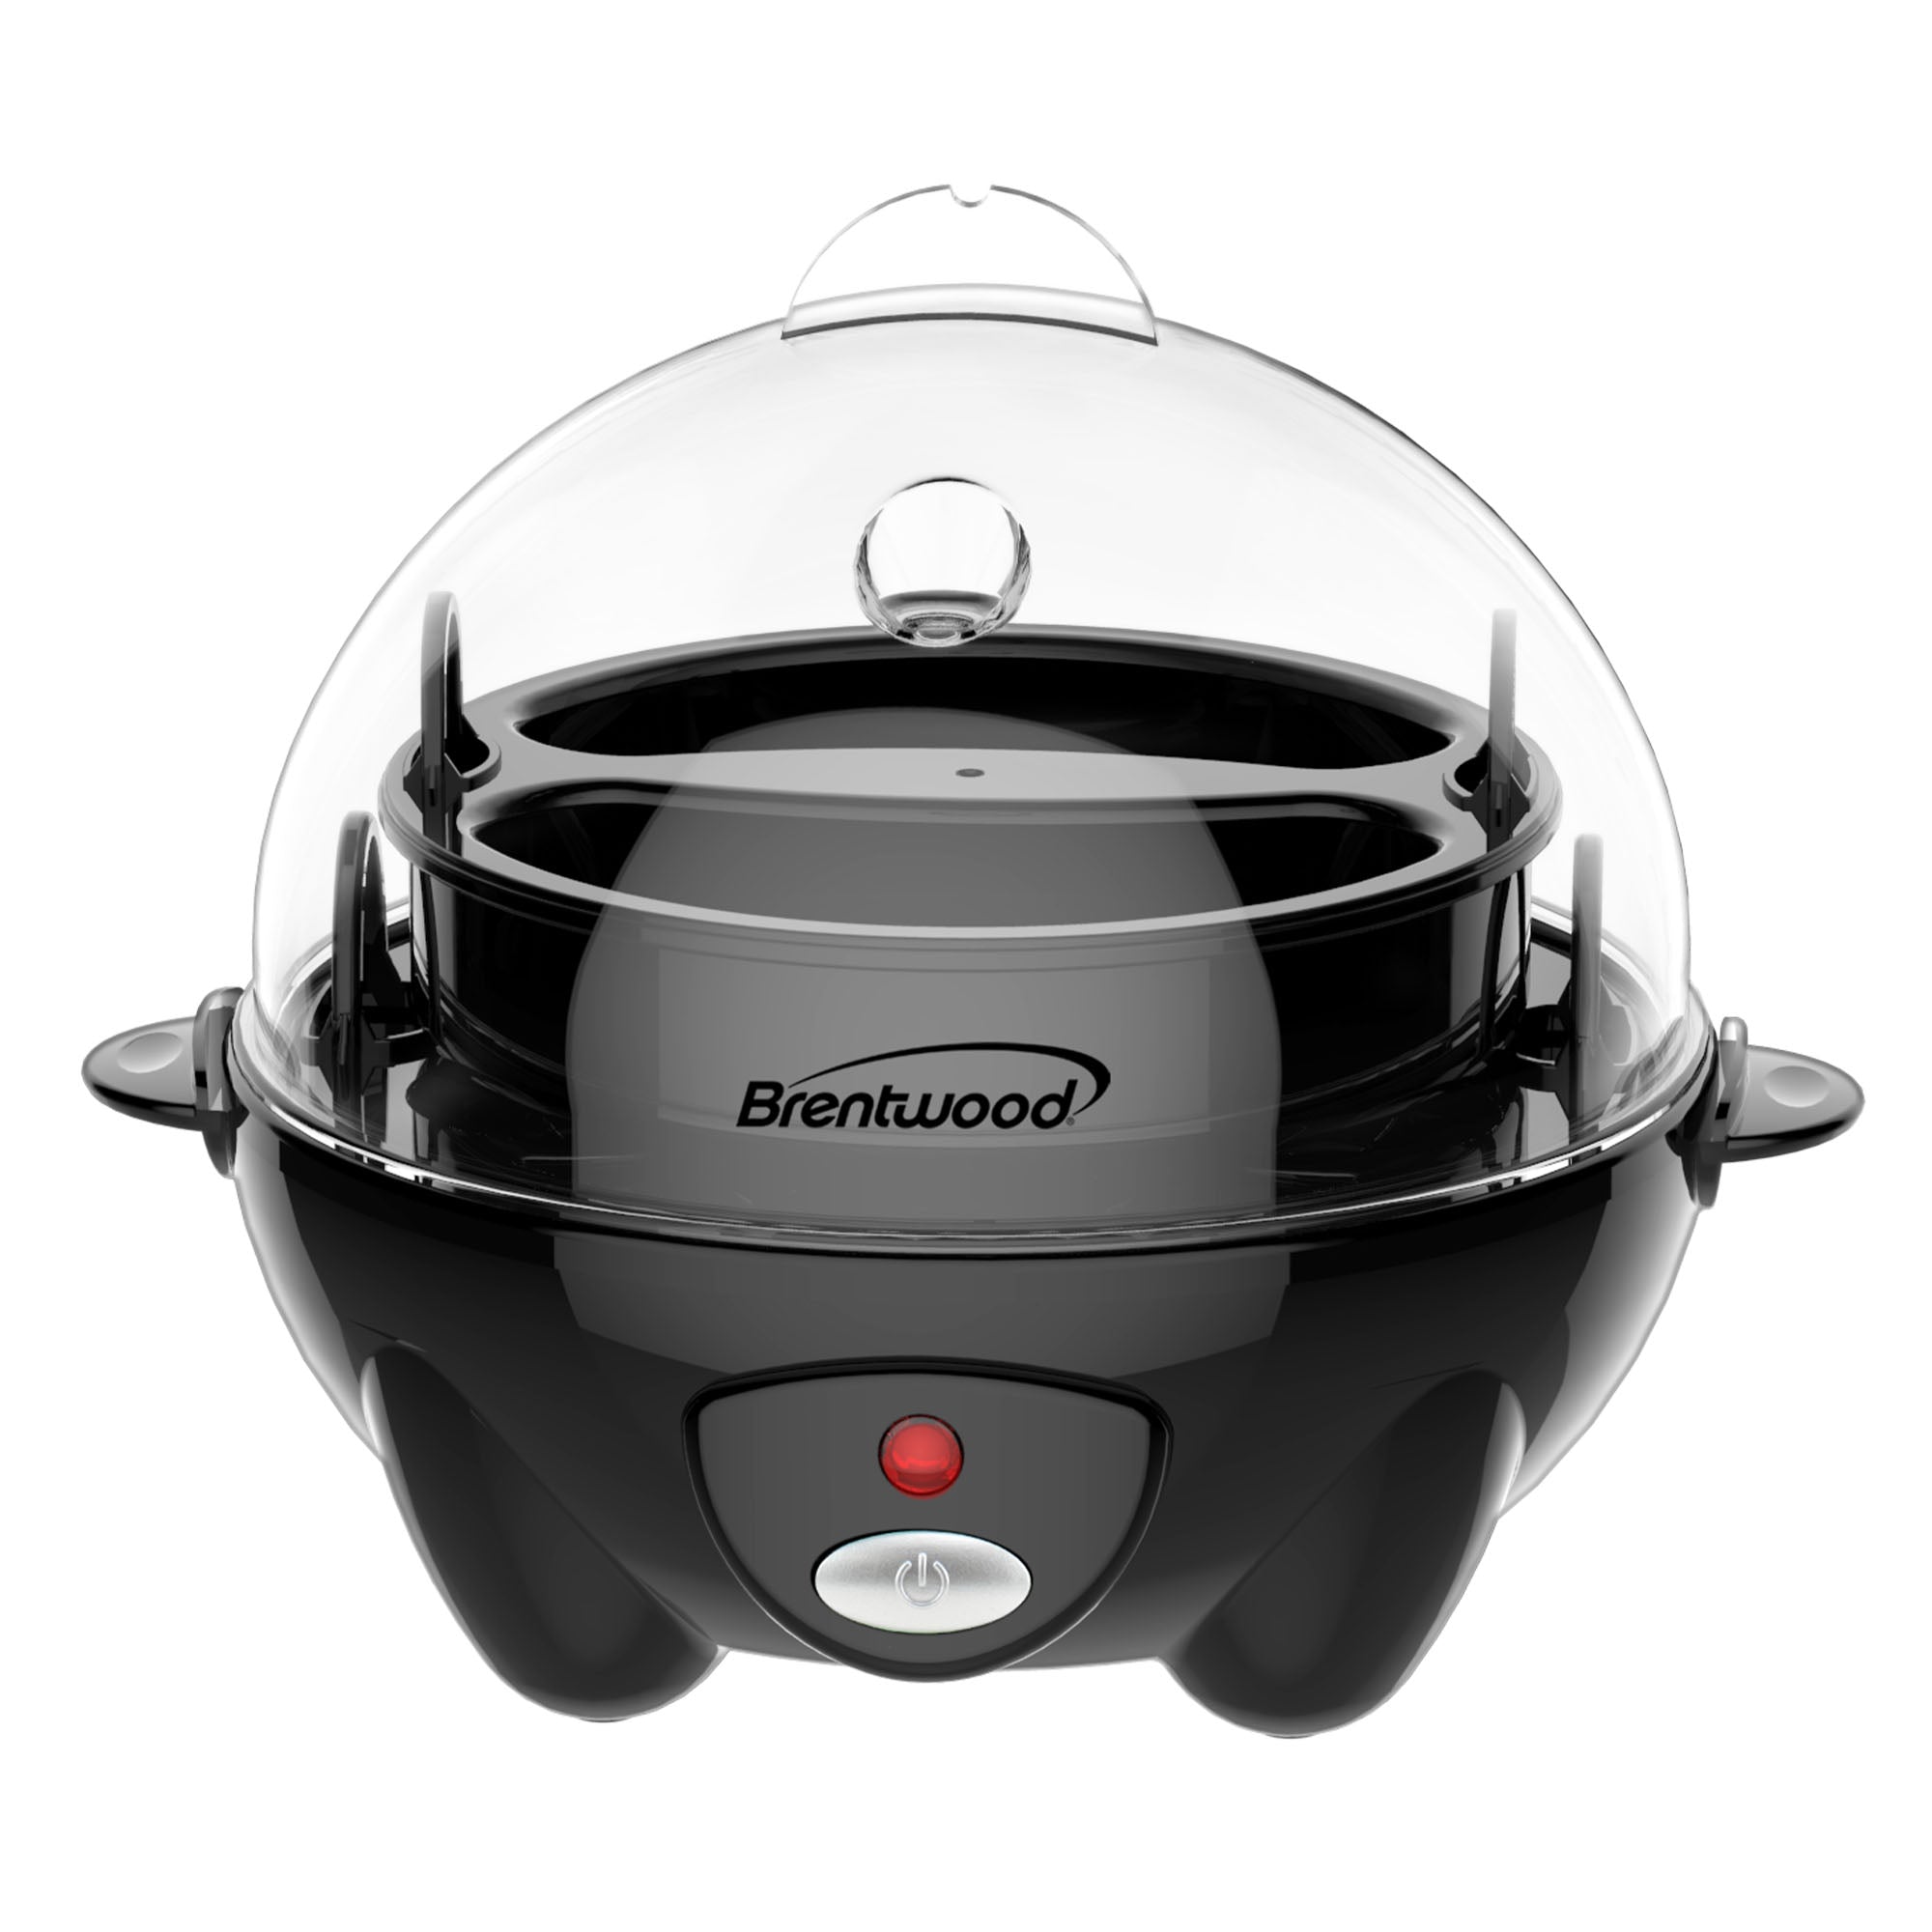 Brentwood TS-1045BK Electric 7 Egg Cooker with Auto Shut Off, Black